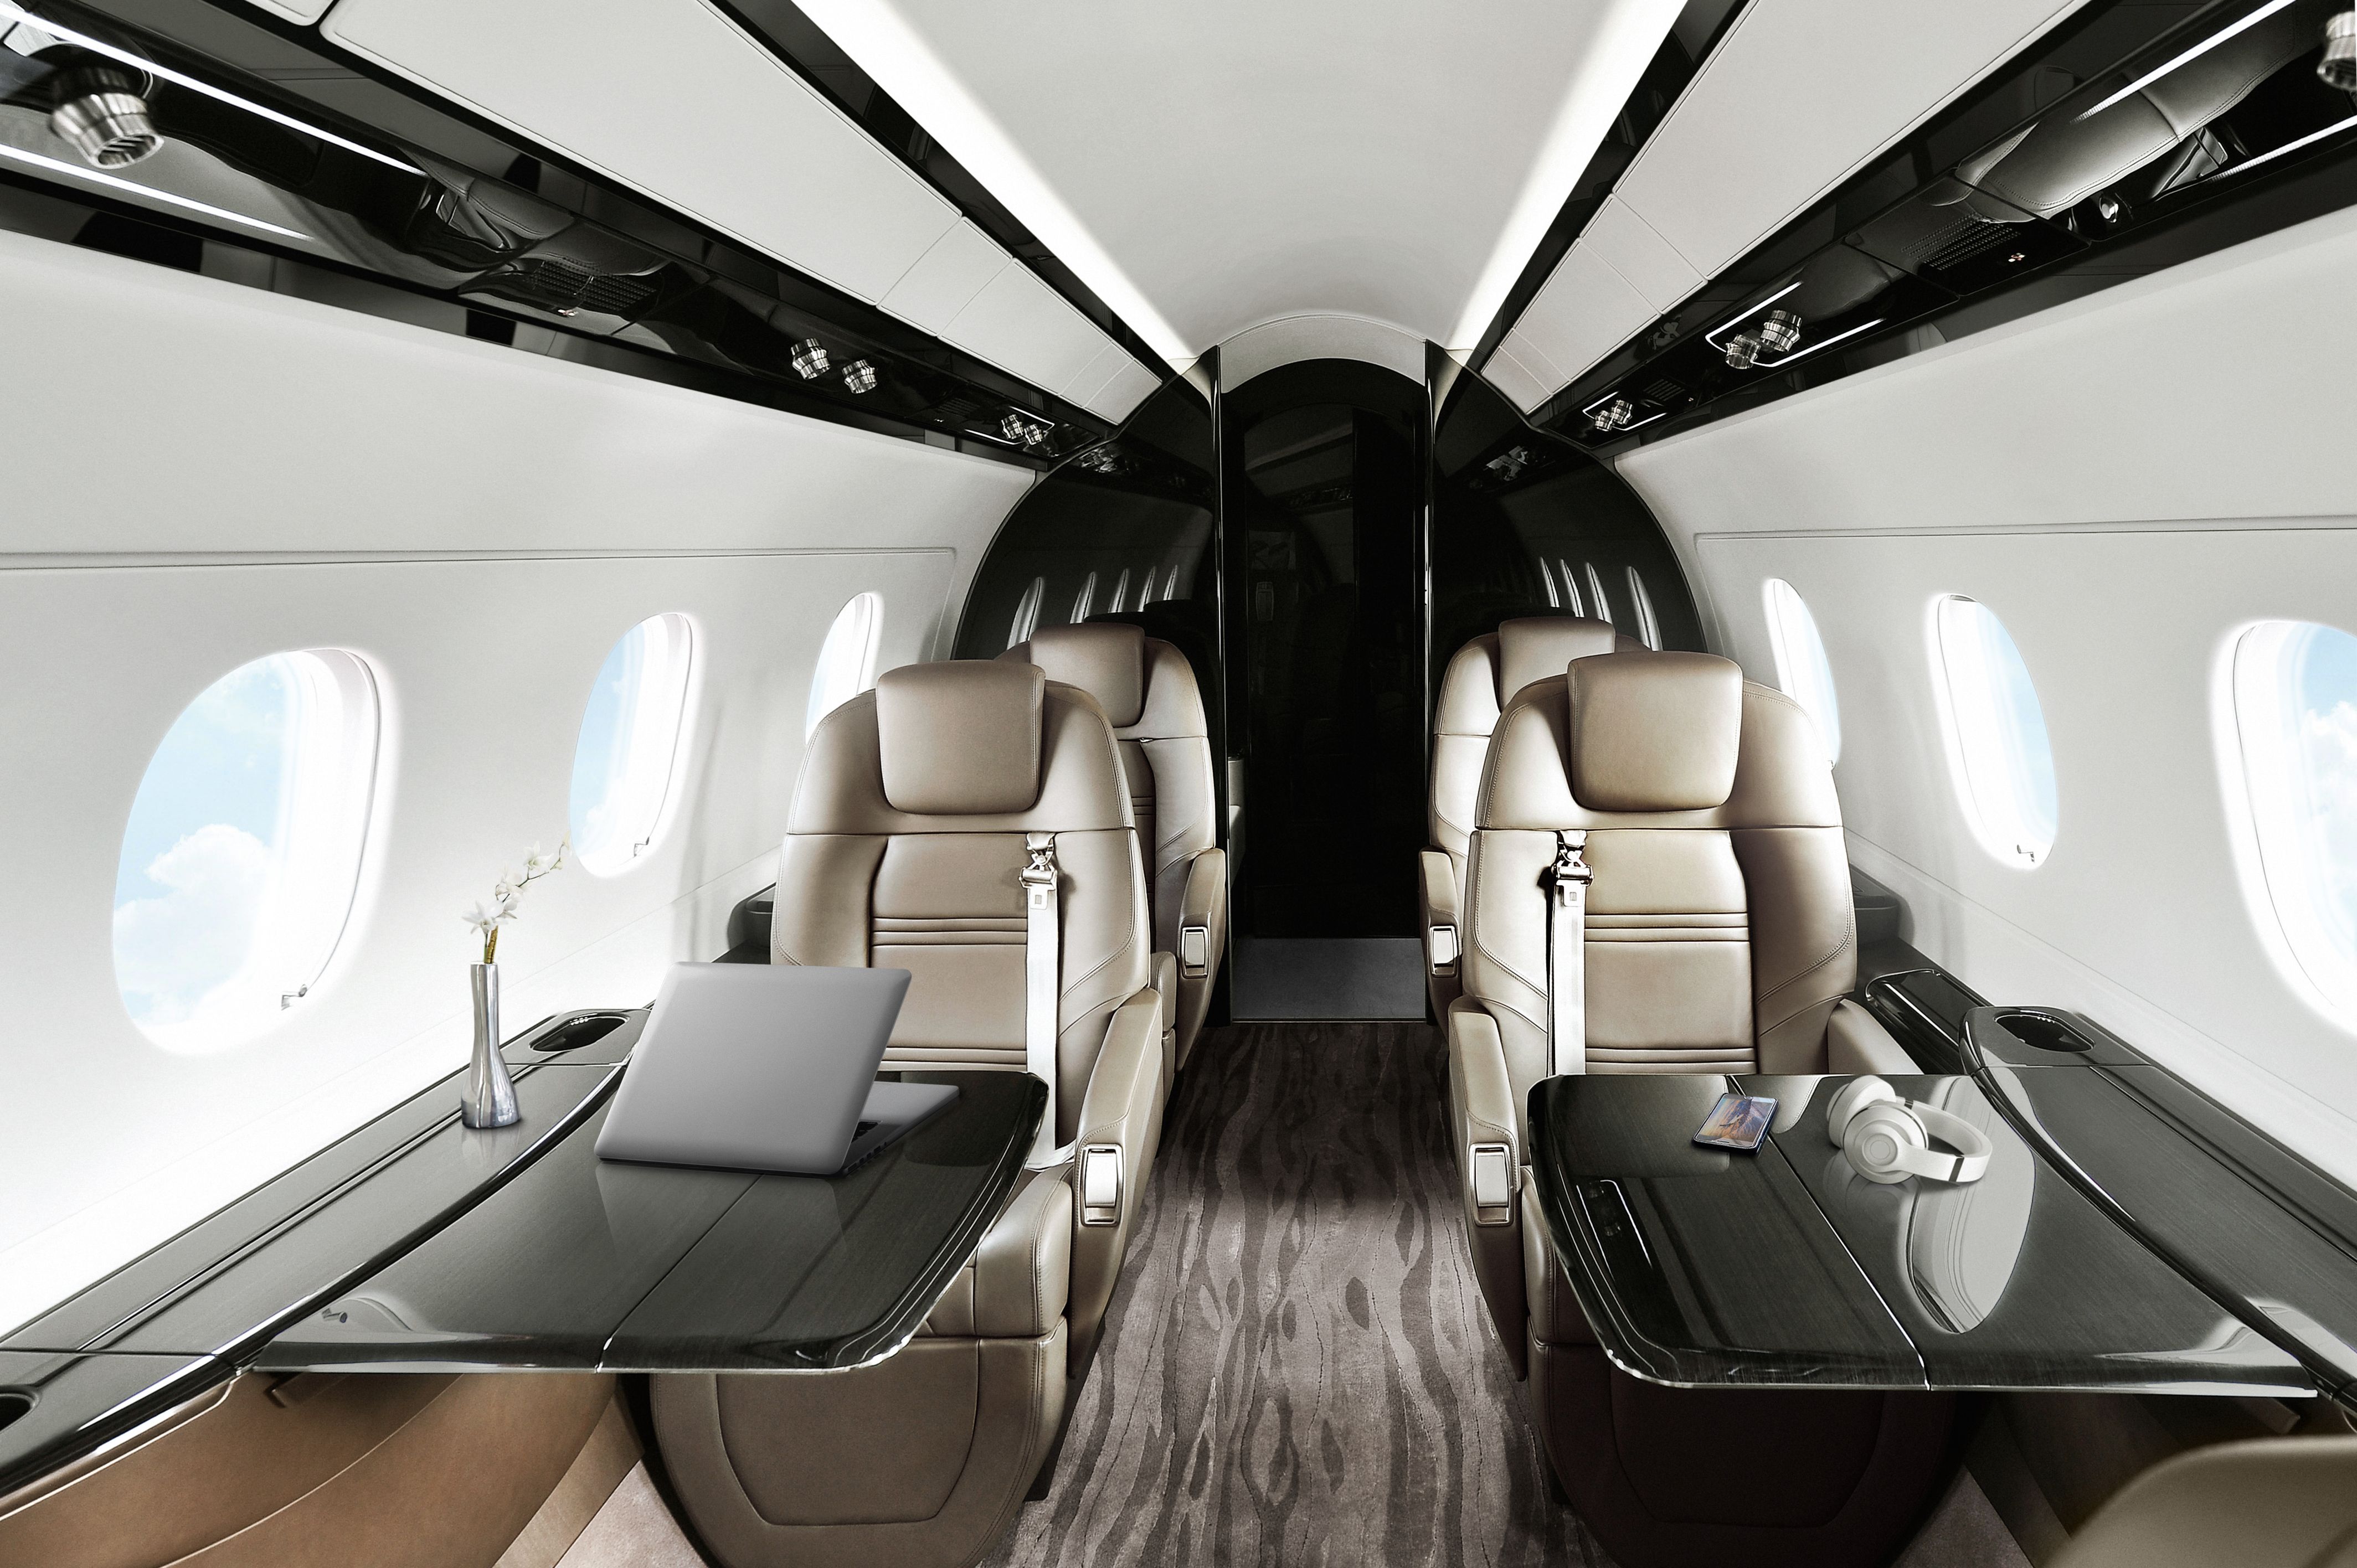 The main cabin area of an Embraer Praetor 500.